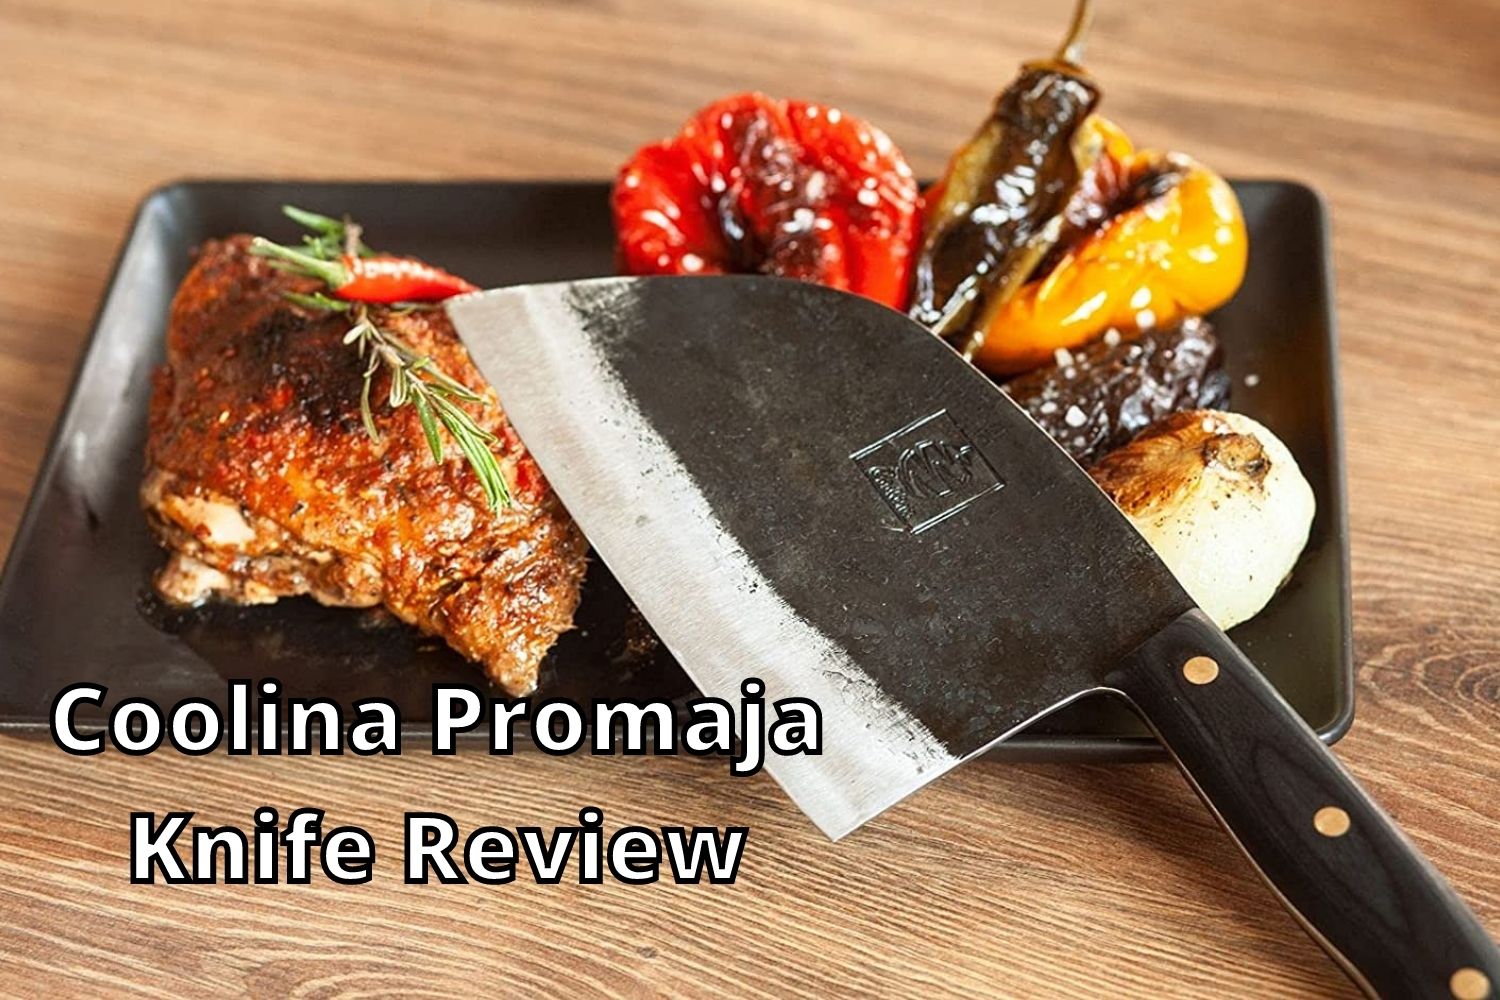 Promaja - professional serbian clever meet cutting carving knife